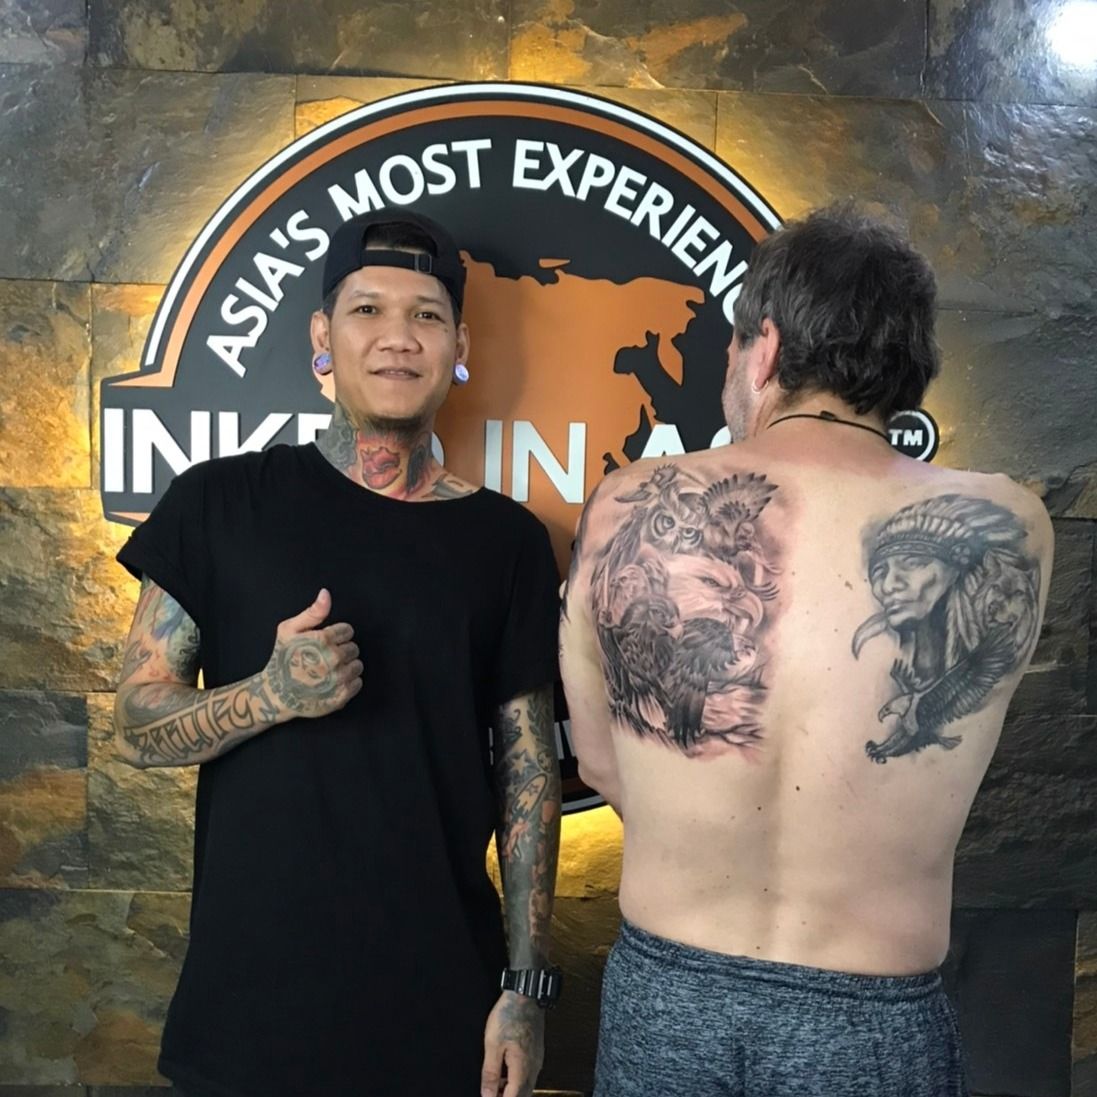 Tattoo uploaded by Inked In Asia Tattoo Studio Patong Phuket Thailand •  Tattoo Ideas For Men, Tattoo Ideas For Women, Very Hygienic And Super Clean  Studio, Designing Tattoos Ideas In Thailand, Great